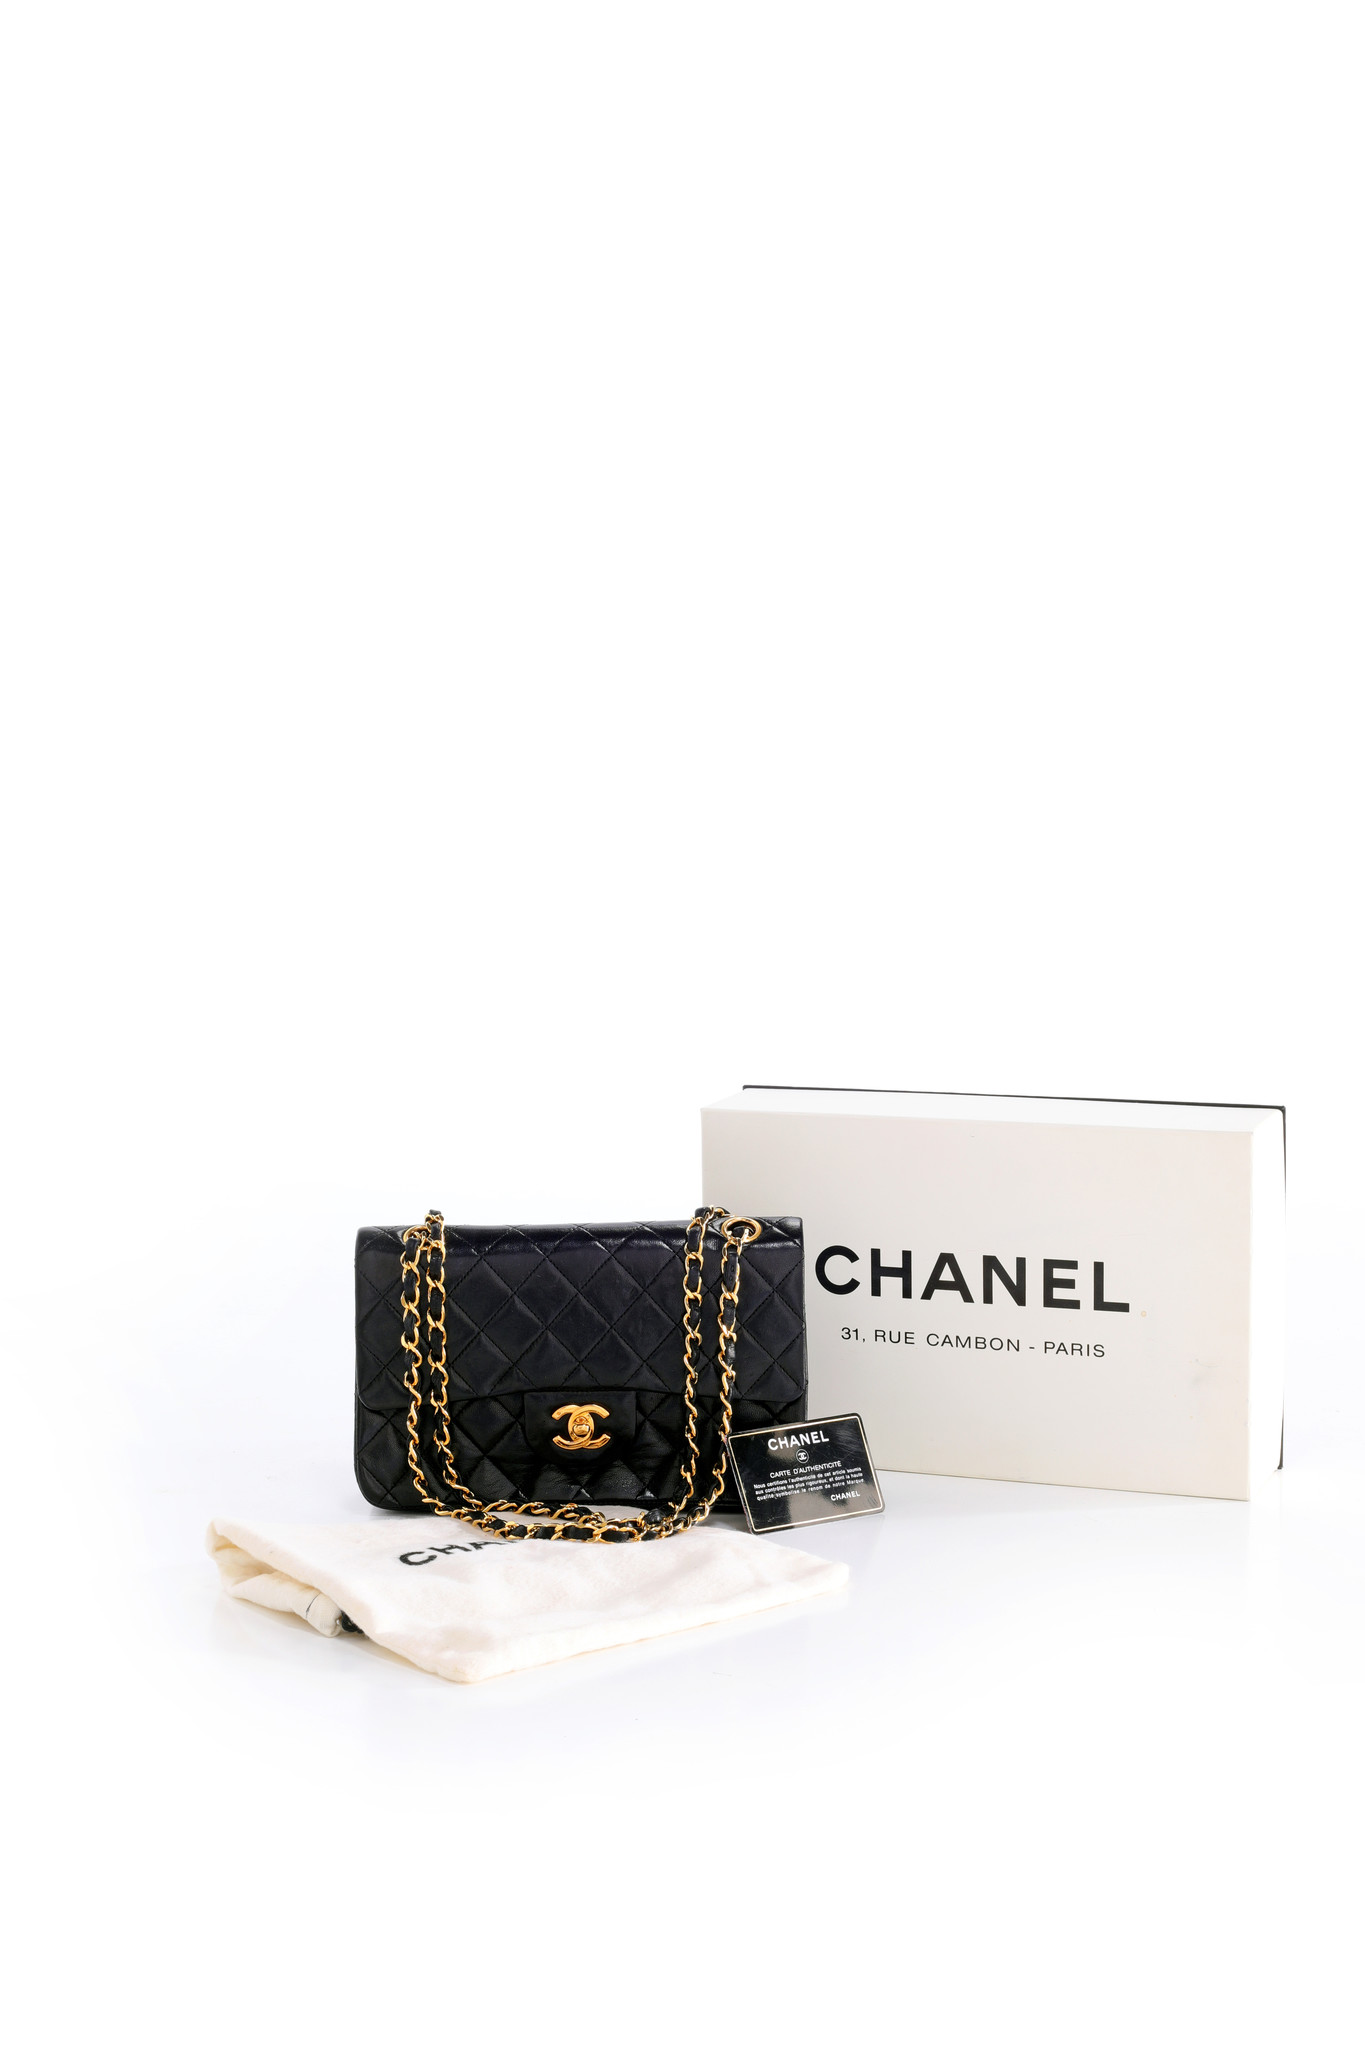 Chanel medium double flap bag - THE HOUSE OF WAUW